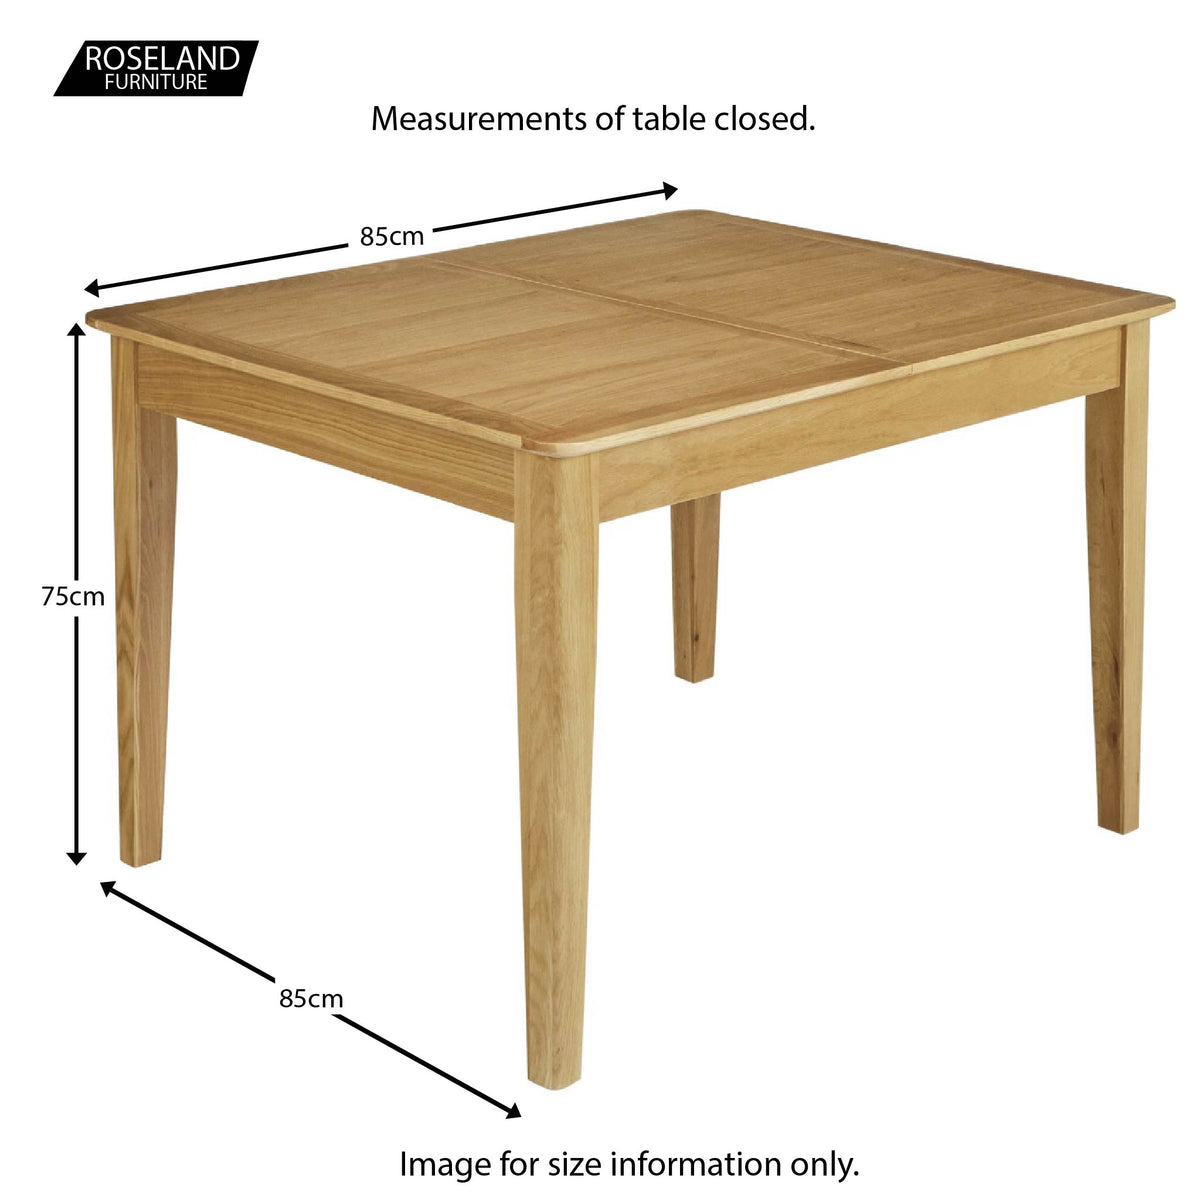 Alba Oak Flip Top Dining Table - Closed size guide